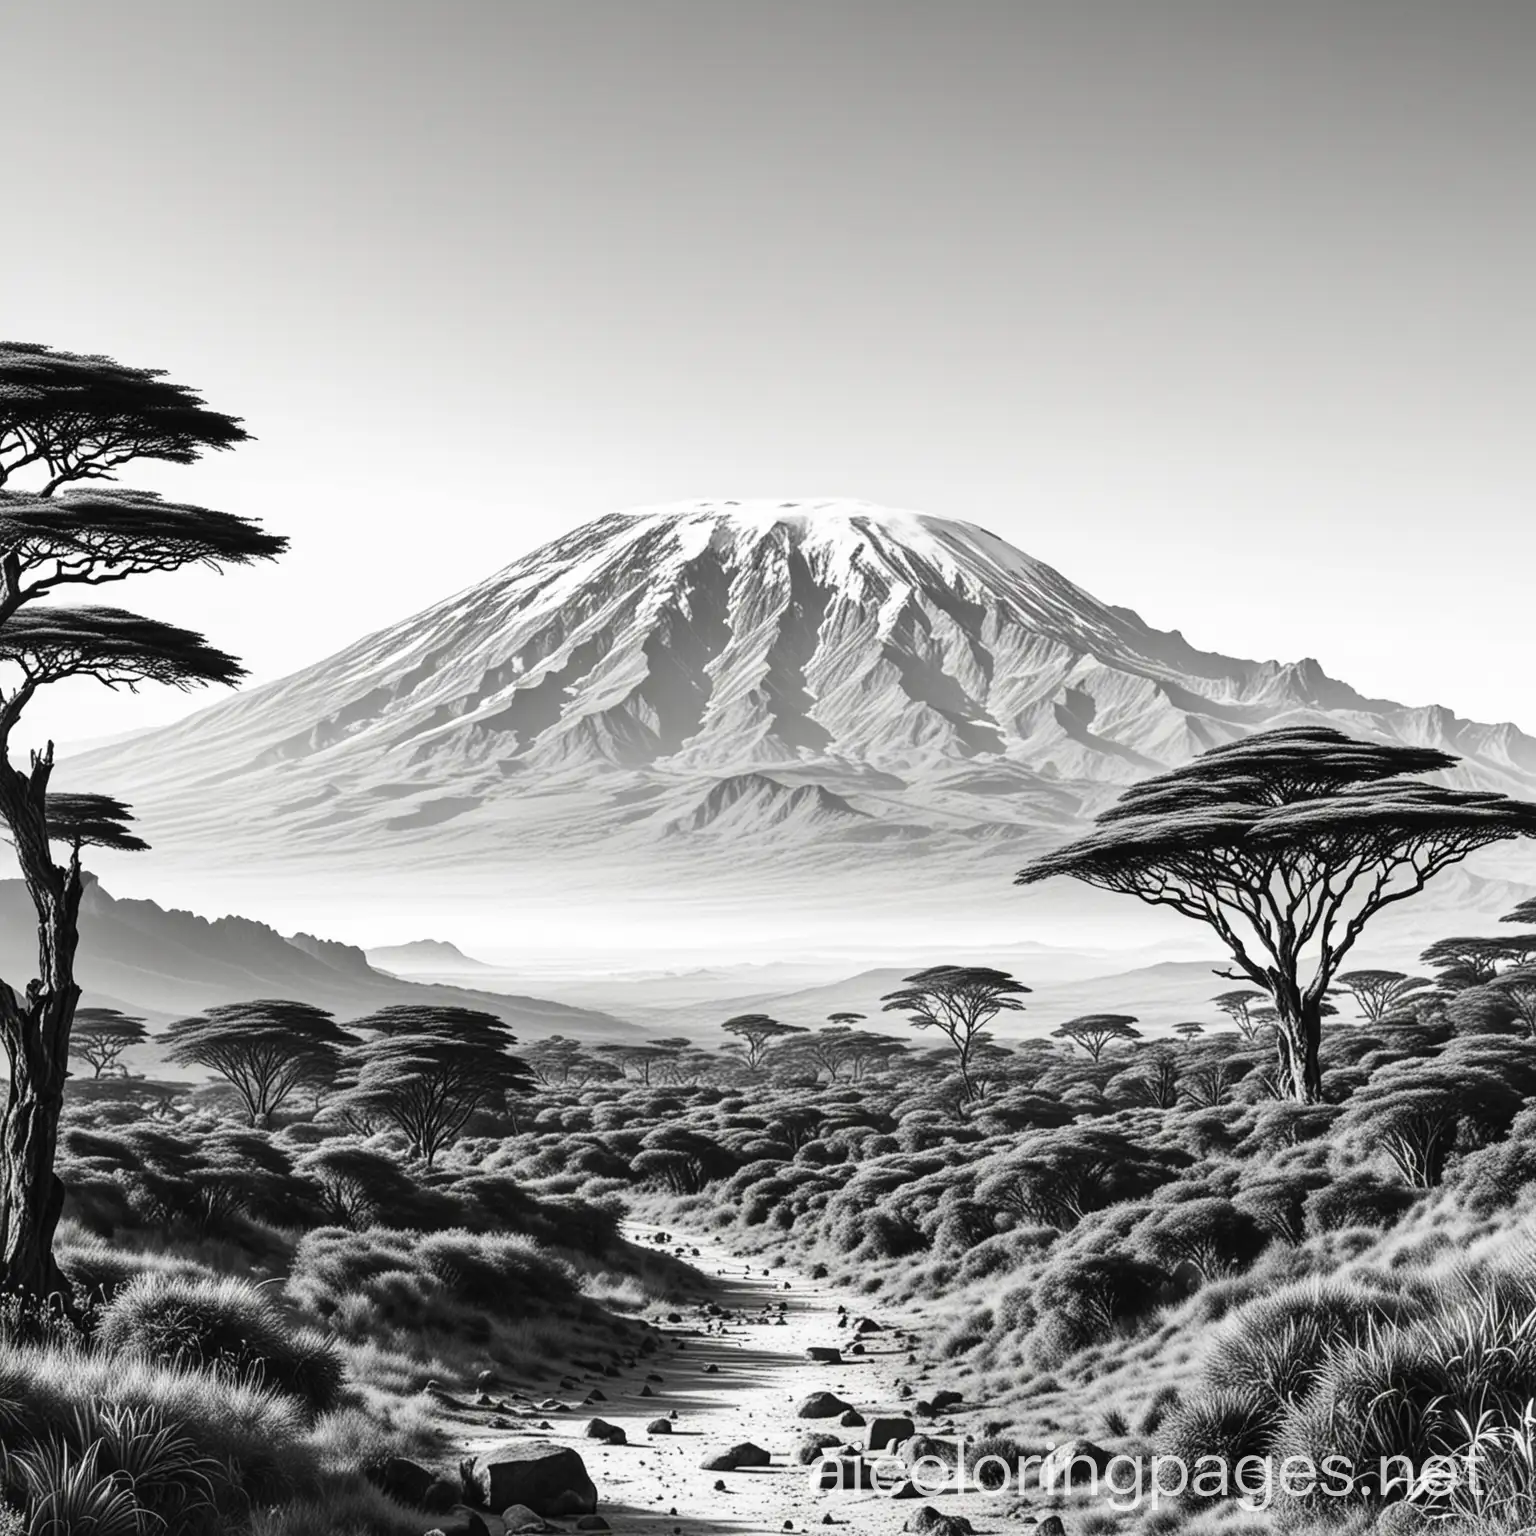 Mount Kilimanjaro, Tanzania, Coloring Page, black and white, line art, white background, Simplicity, Ample White Space. The background of the coloring page is plain white to make it easy for young children to color within the lines. The outlines of all the subjects are easy to distinguish, making it simple for kids to color without too much difficulty